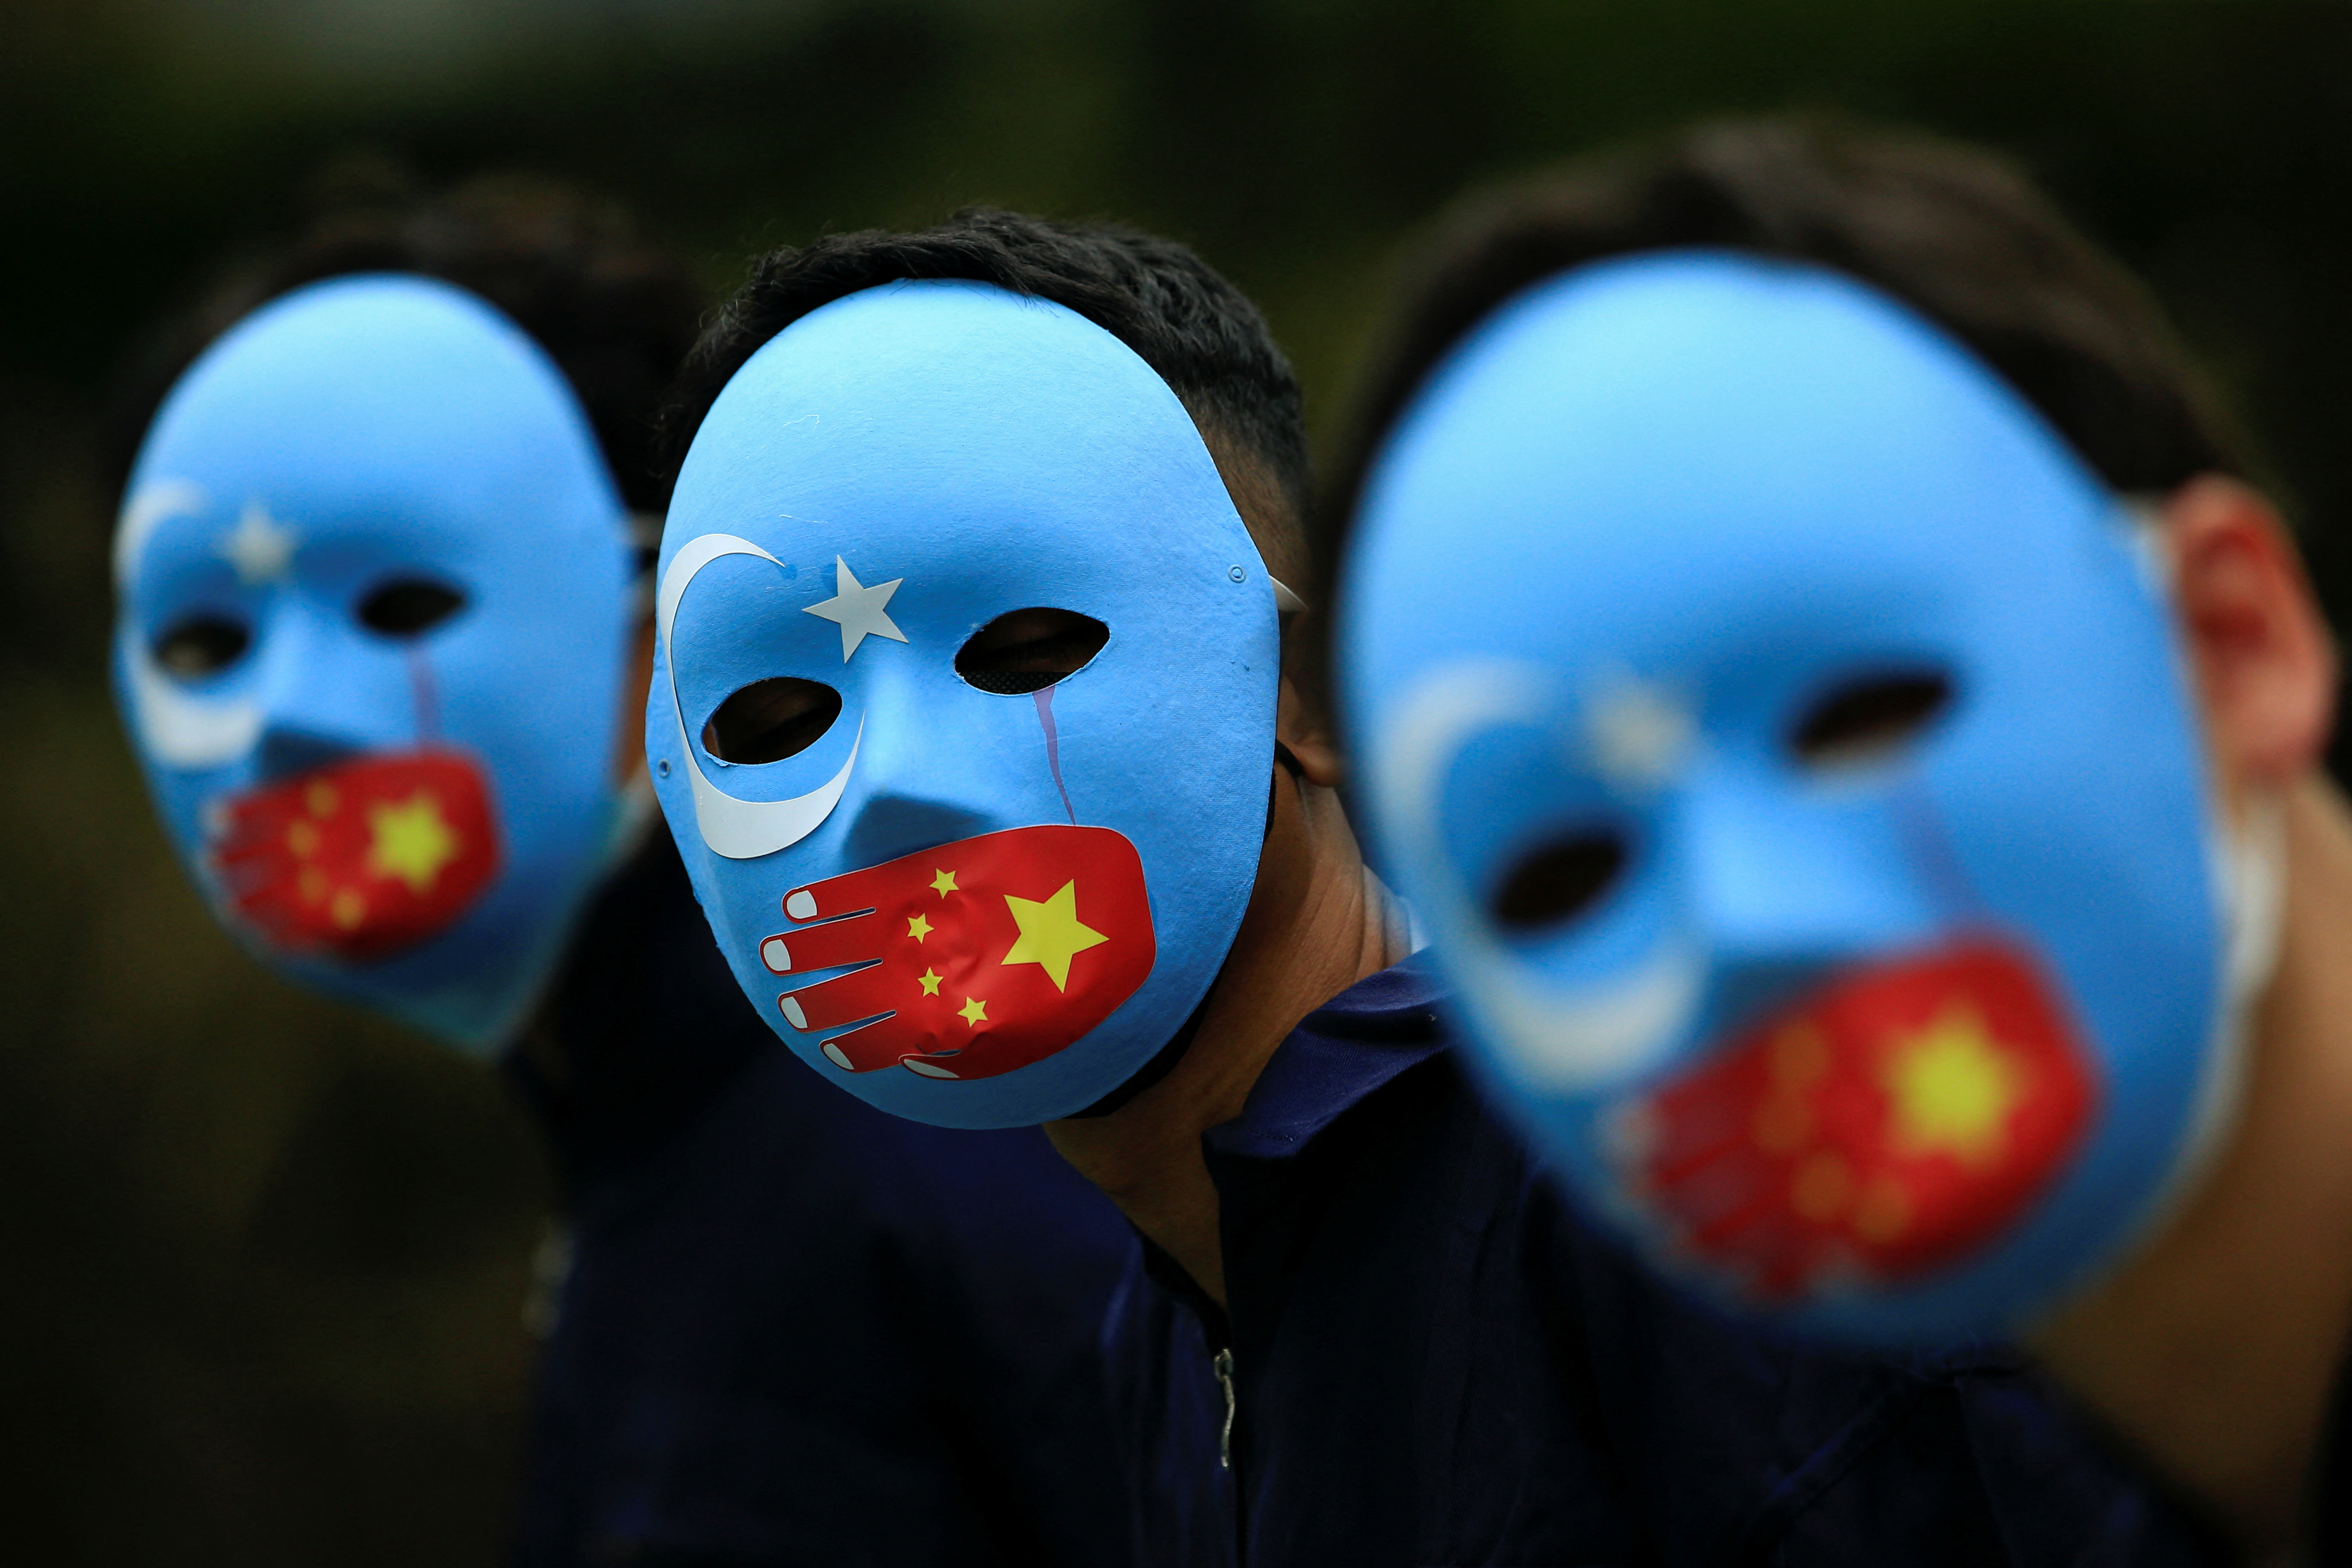 Activists take part in a protest against China's treatment towards the ethnic Uyghur people and calling for a boycott of the 2022 Winter Olympics in Beijing, at a park Jakarta, Indonesia, January 4, 2022. REUTERS/Willy Kurniawan